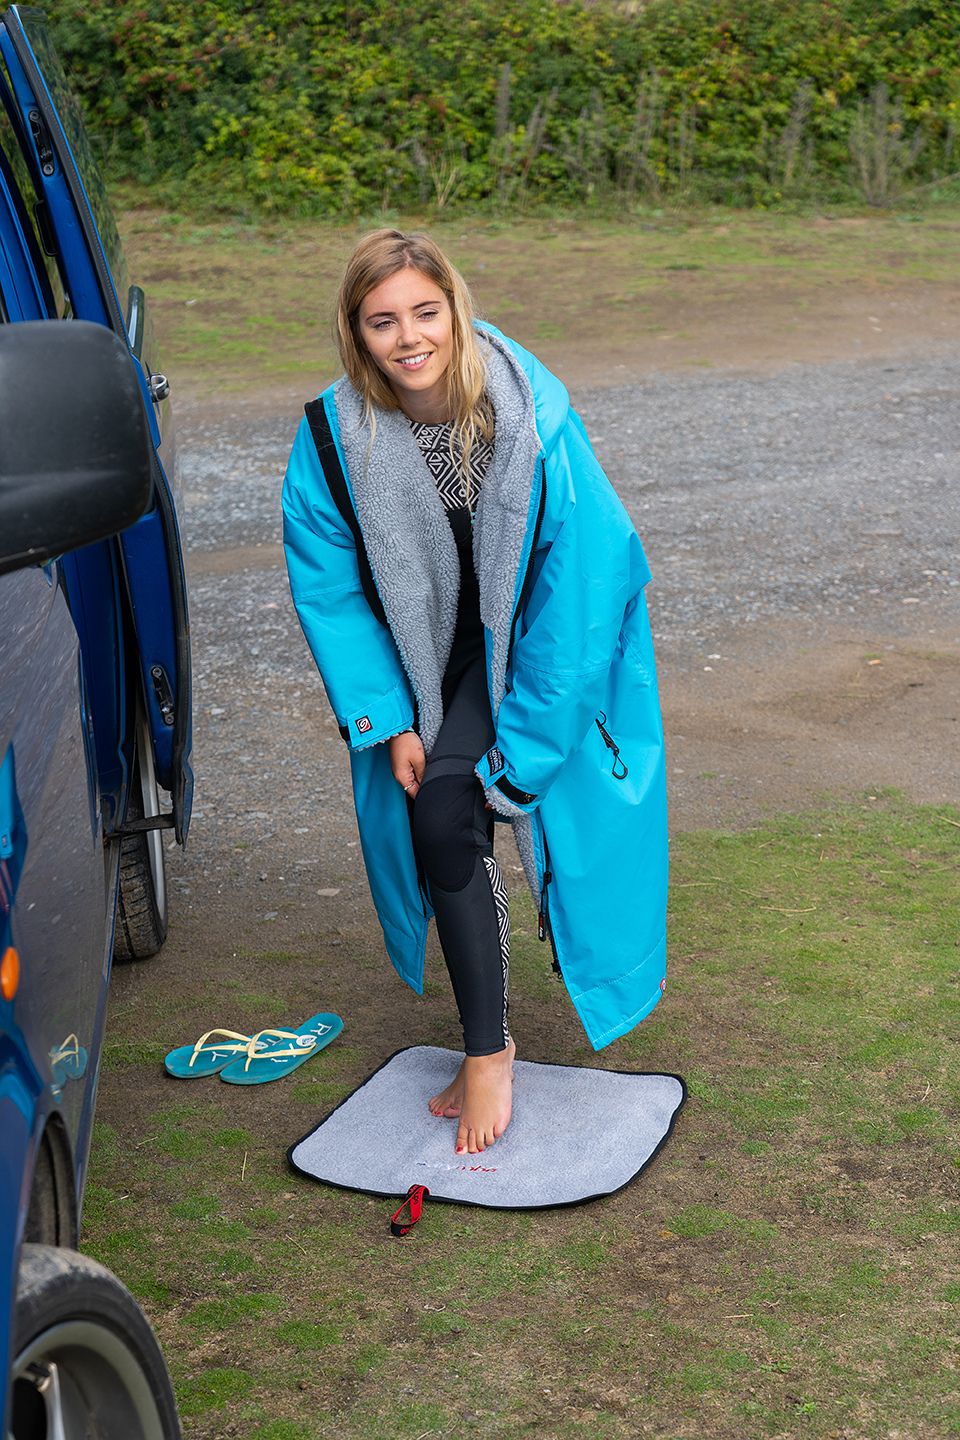 Woman standing on a Dryrobe changing mat while getting changed into a wetsuit.